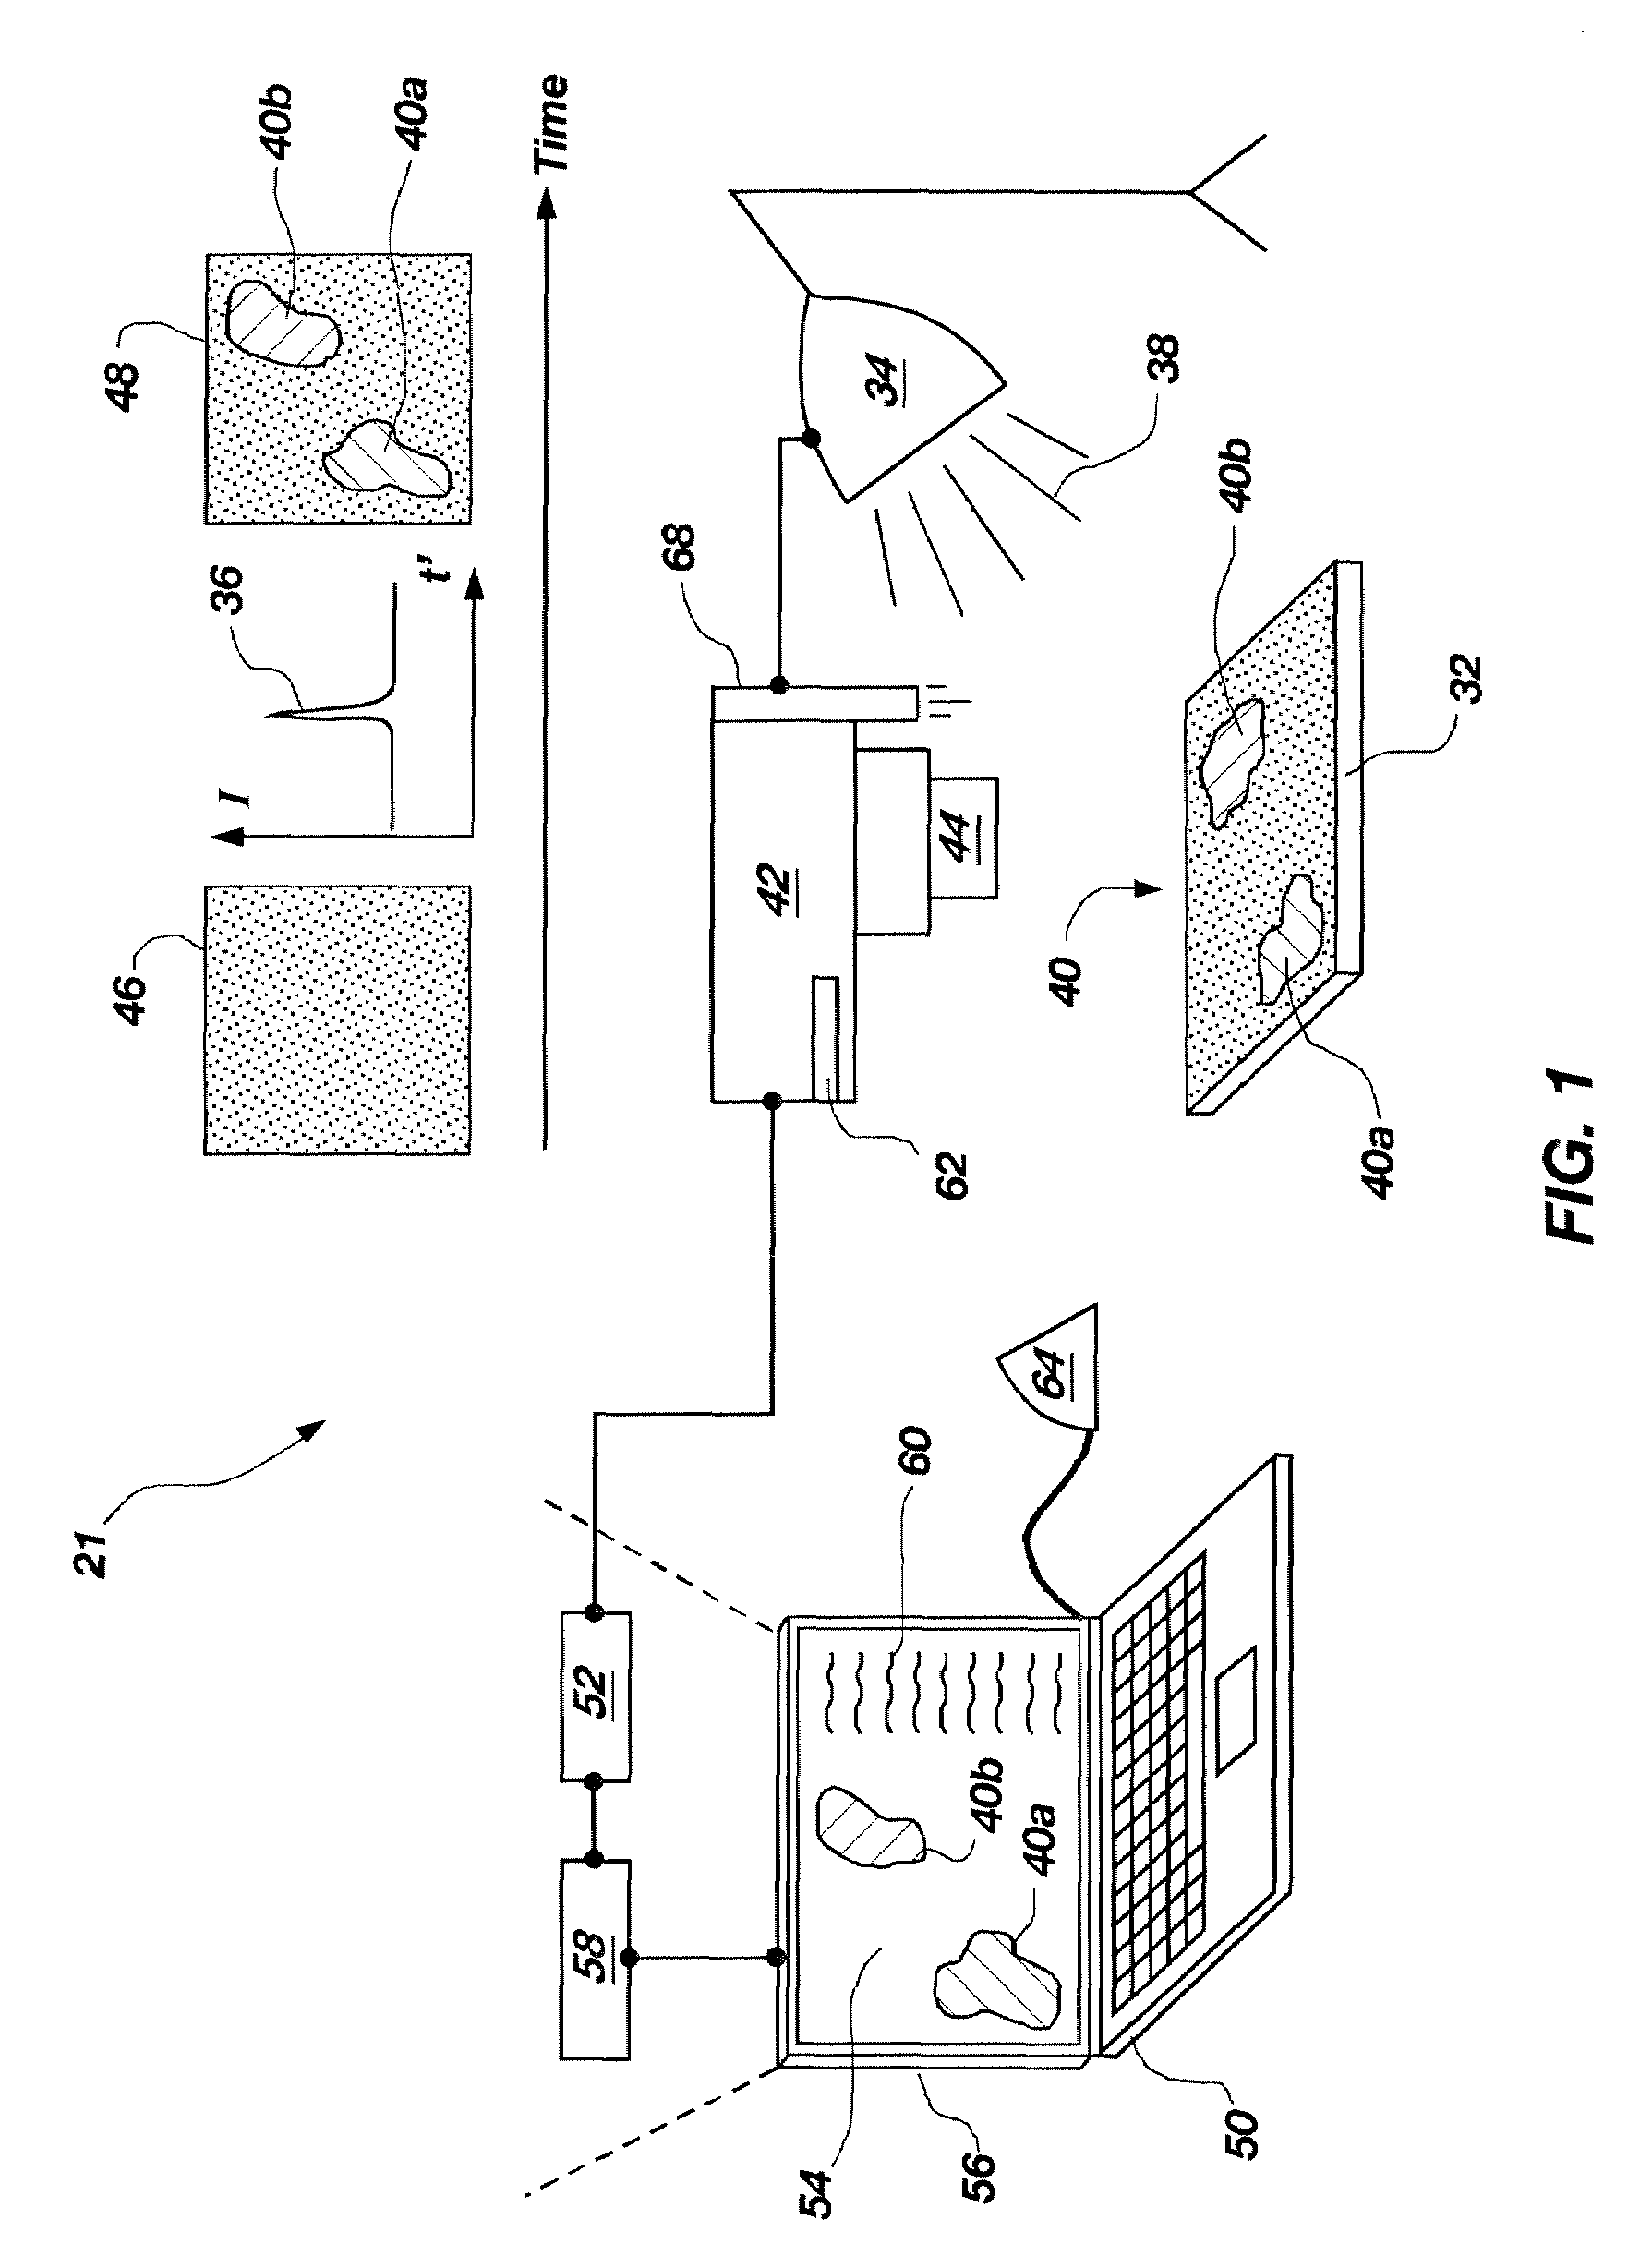 Method and system for wide-area ultraviolet detection of forensic evidence